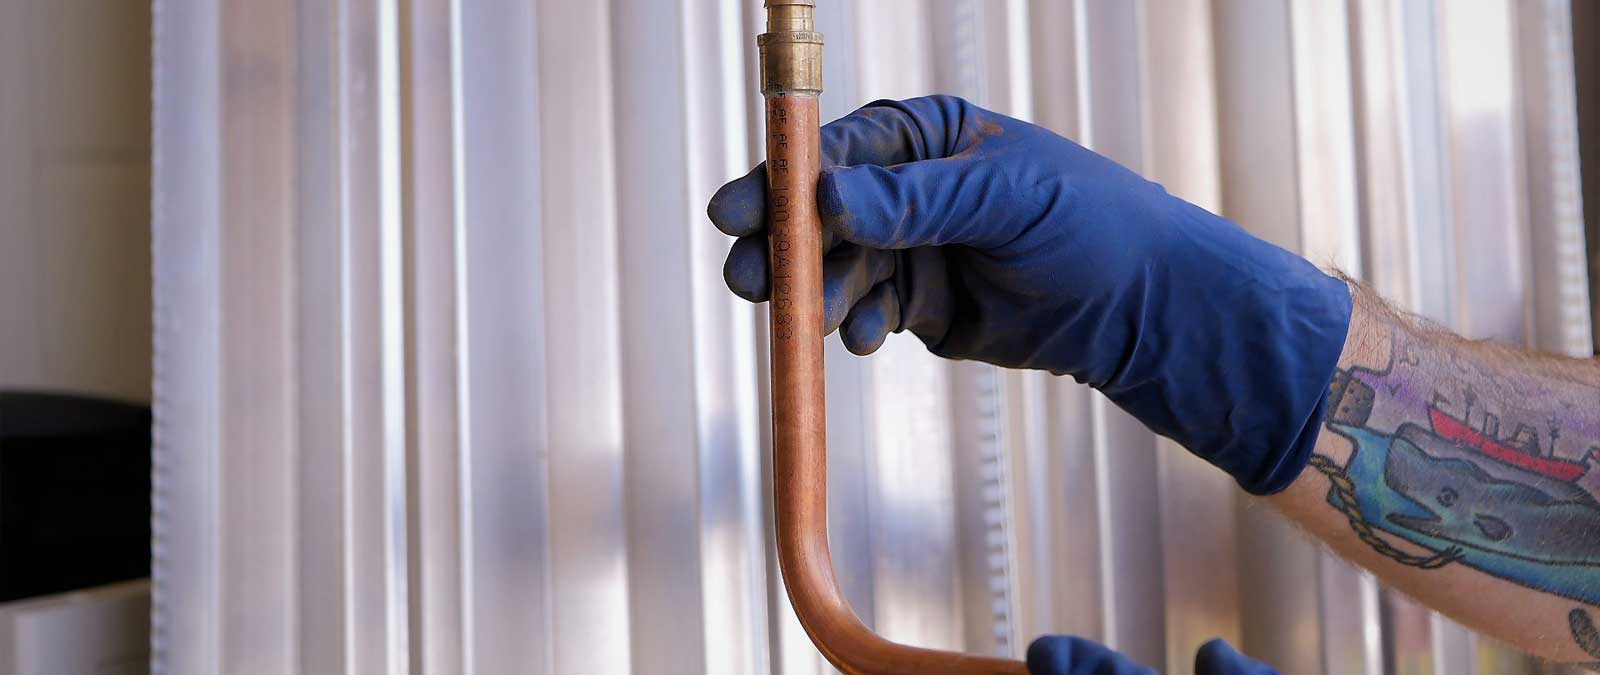 West Palm Beach, Fl Residential Plumbing Services